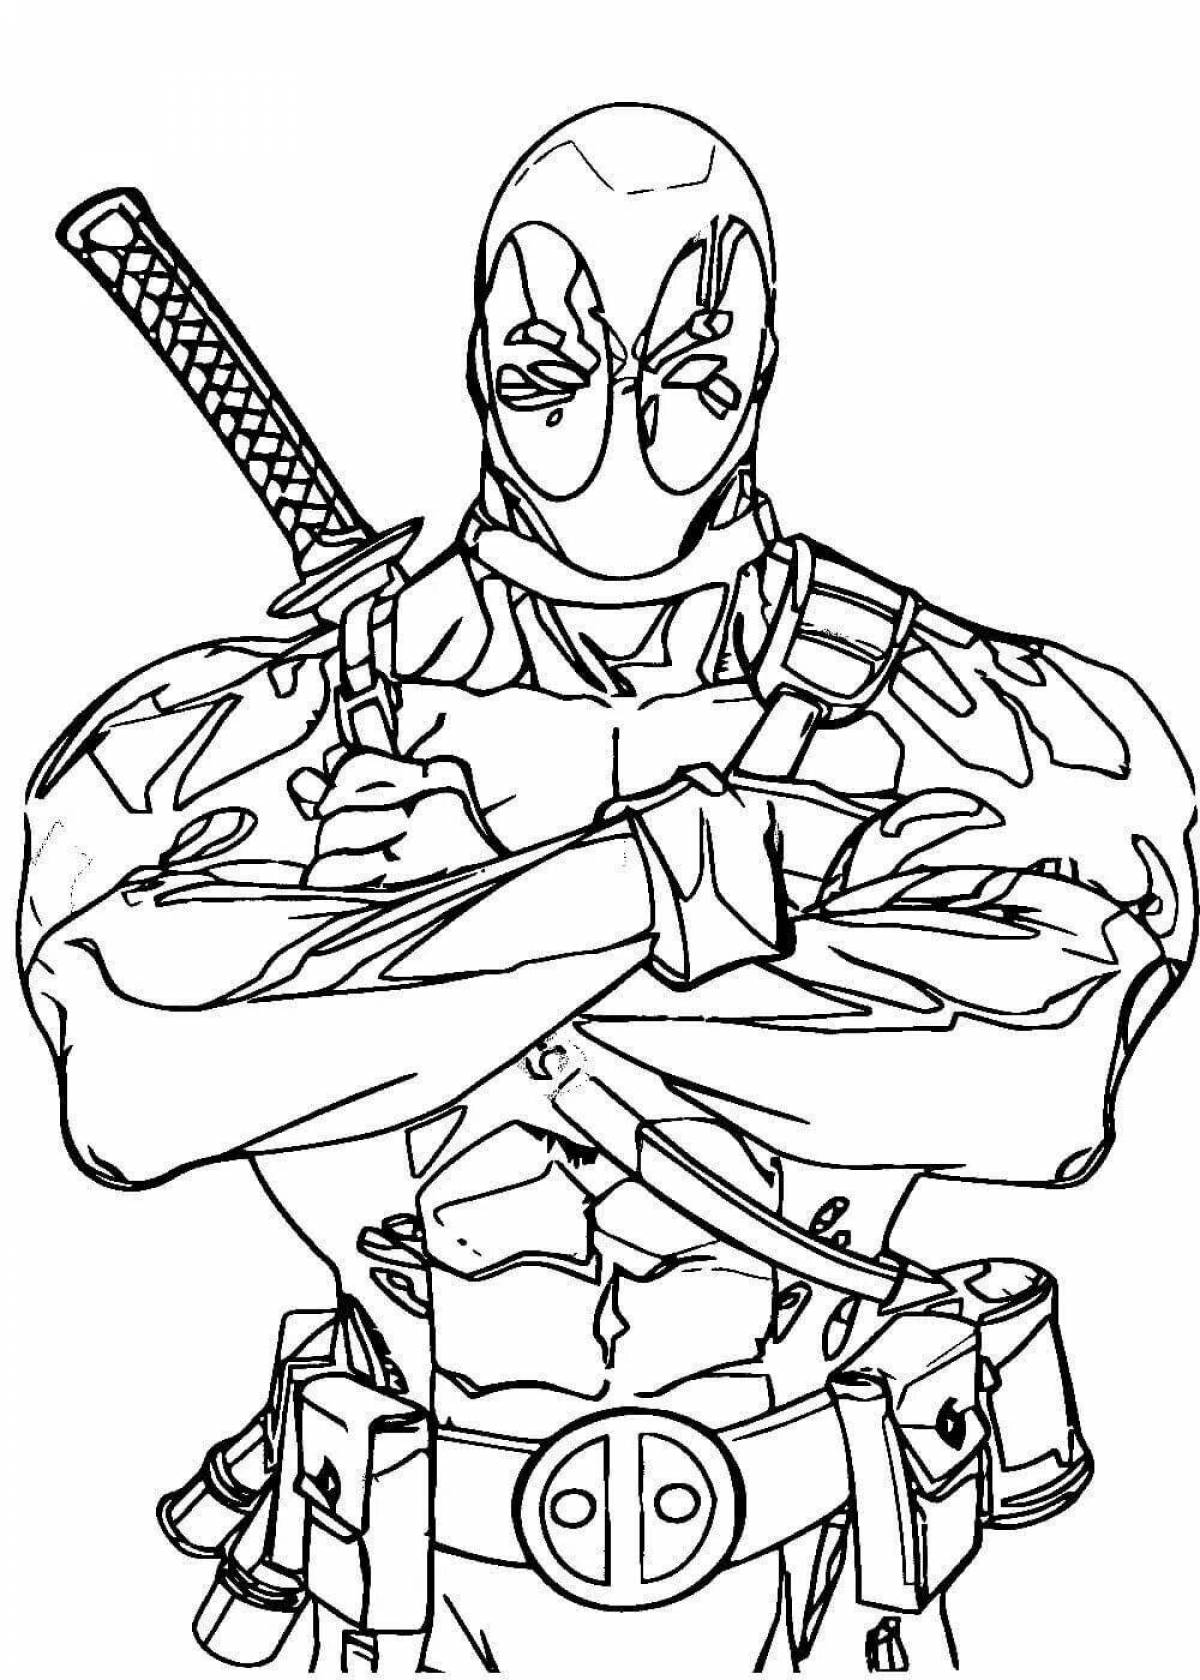 Charming deadpool coloring page